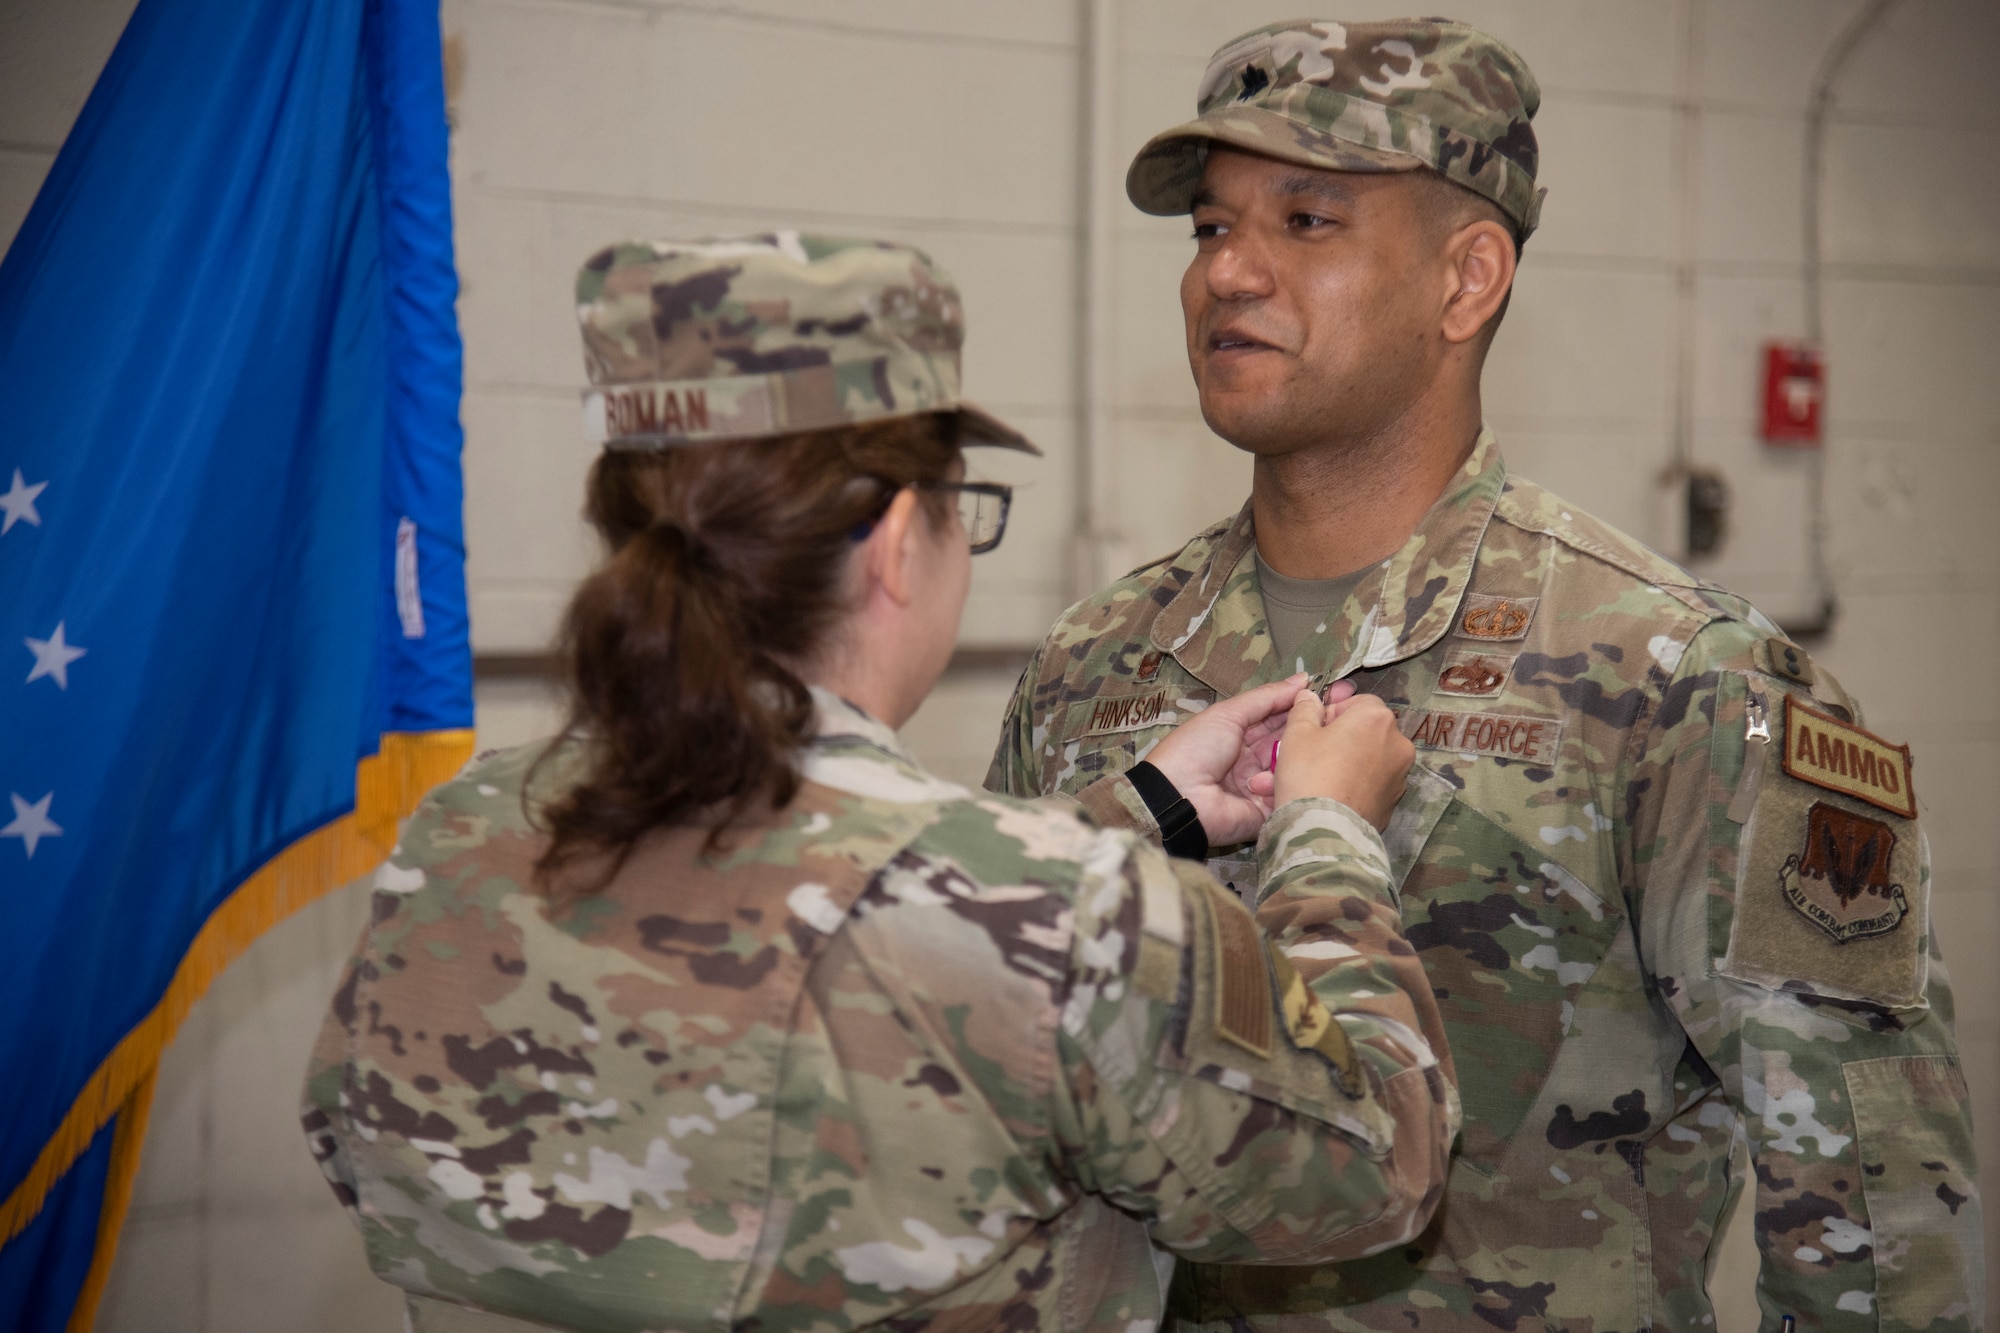 Col. Kathryn Roman, left, 4th Maintenance Group commander, awards the Meritorious Service Medal to Lt. Col. Marvin Hinkson, right, 4th Munitions Squadron outgoing commander, during the 4th MUNS change of command ceremony at Seymour Johnson Air Force Base, North Carolina, June 1, 2023. In keeping with tradition, the ceremony gave Hinkson chance to bid his Airmen farewell, and allowed Maj. James Phillips, 4th MUNS incoming commander, the opportunity to formally assume command of the squadron, meet the Airmen in his unit, and express his aspirations for the squadron’s future. (U.S. Air Force photo by Tech. Sgt. Christopher Hubenthal)